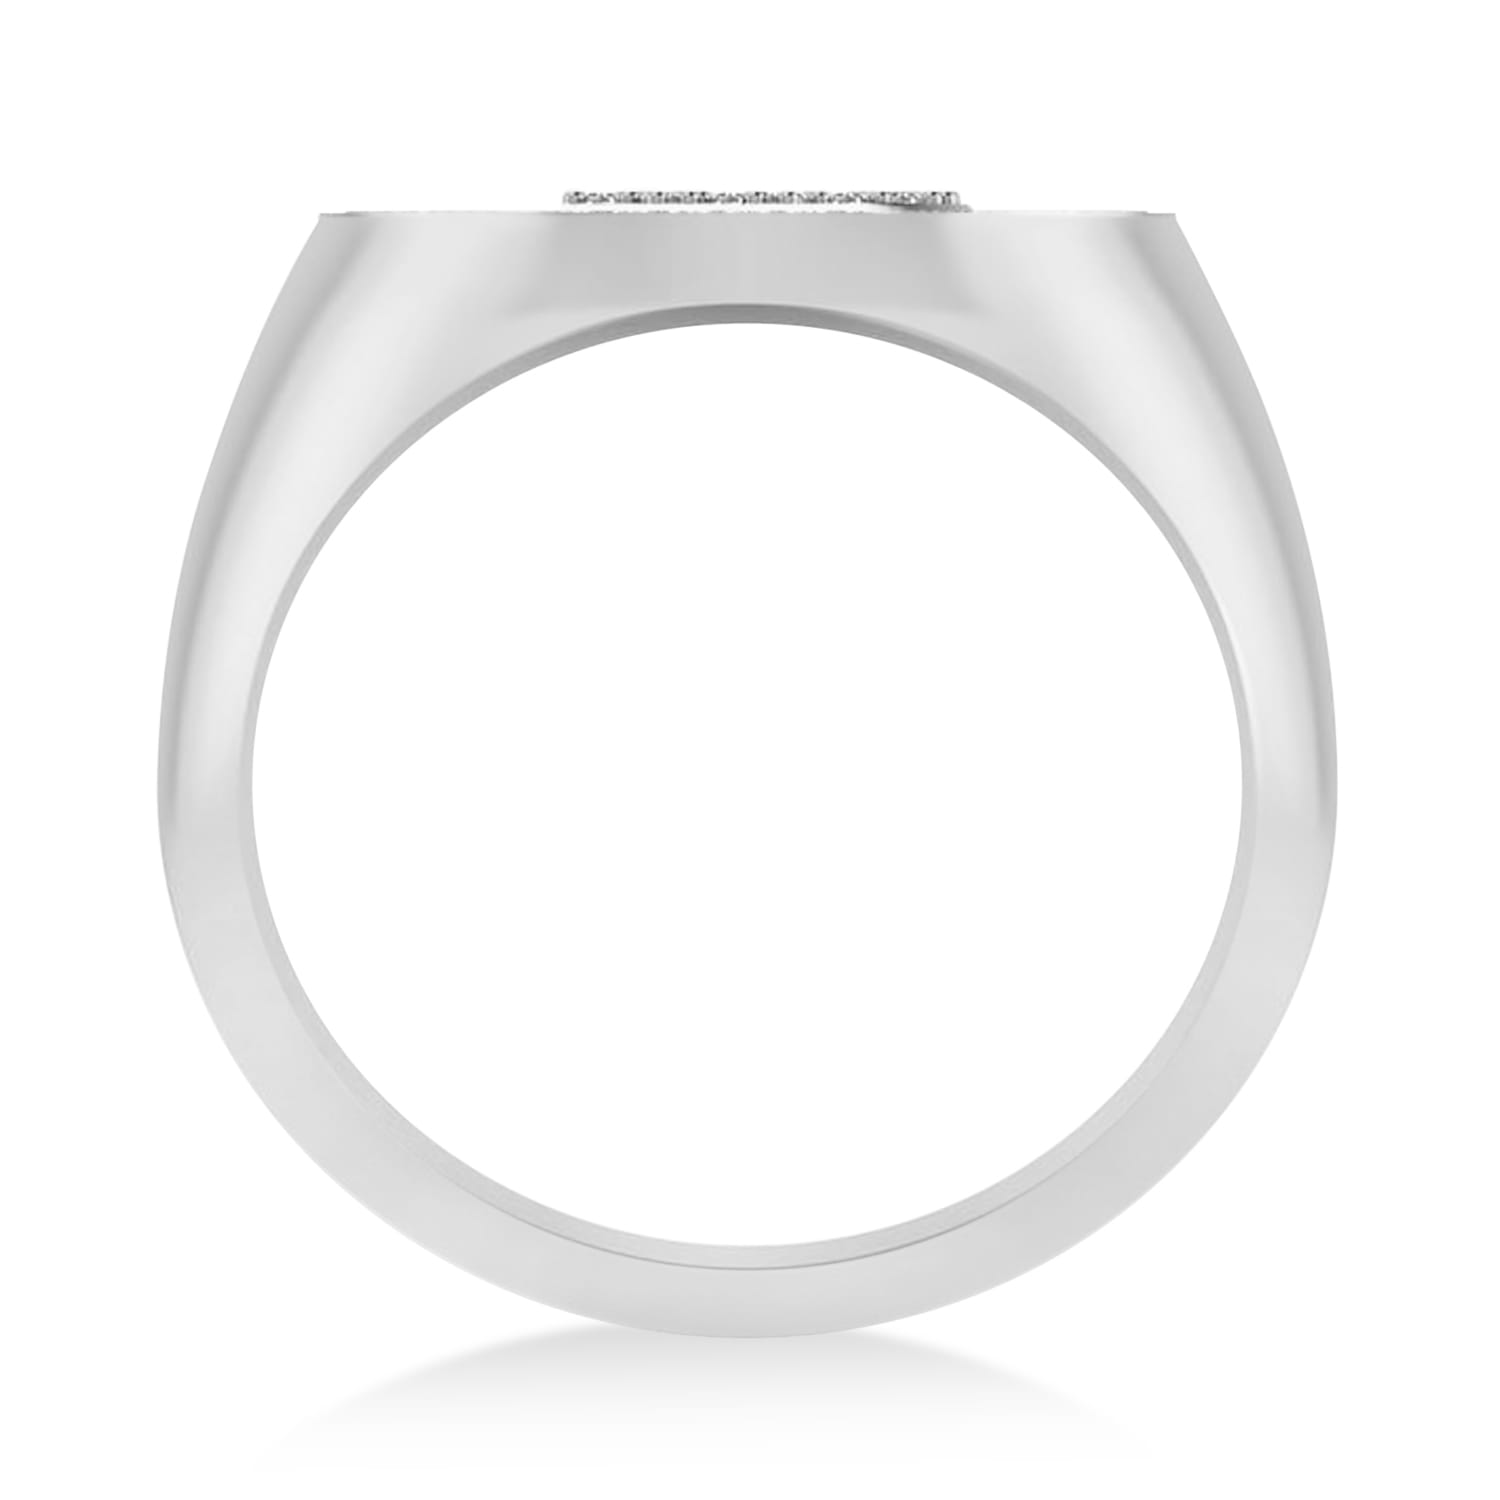 Diamond Cryptocurrency Bitcoin Men's Ring 14k White Gold (0.34ct)